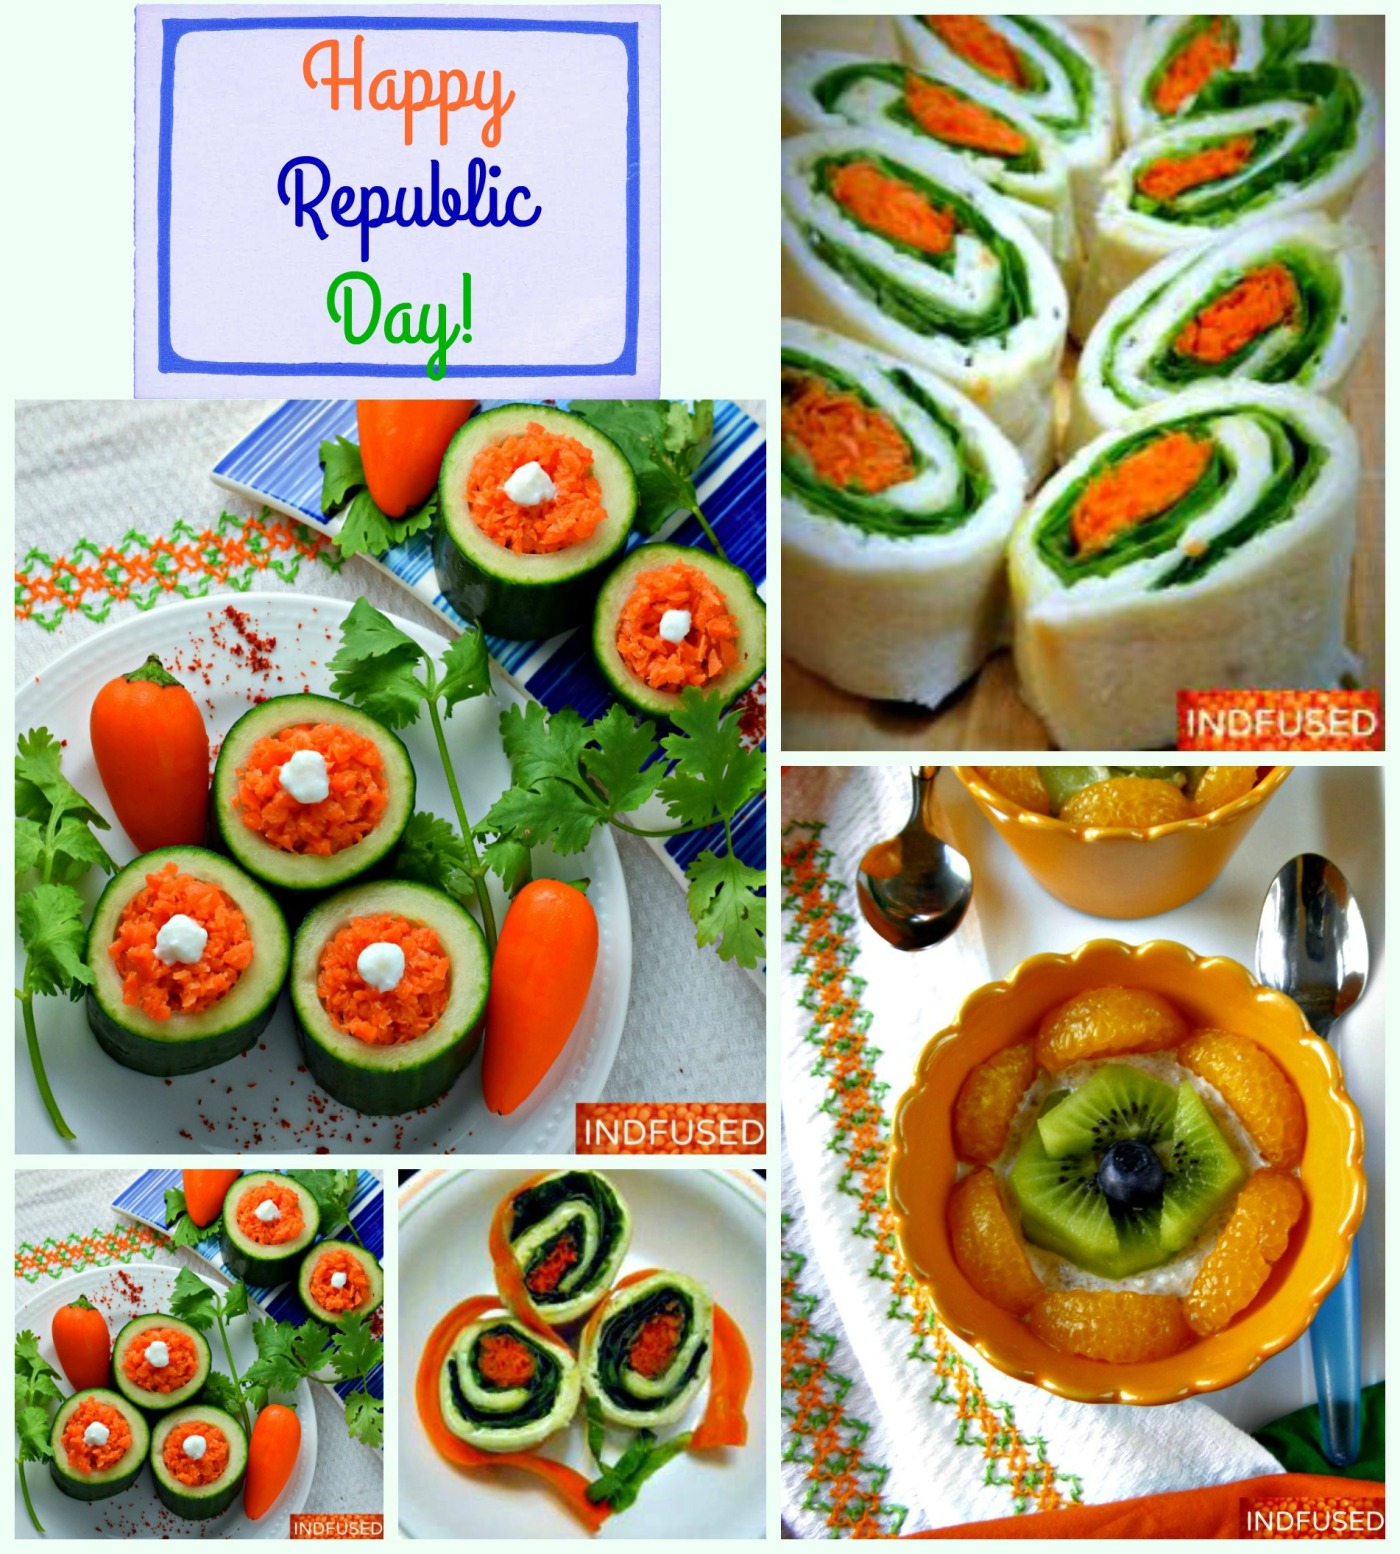 Easy, fun and healthy recipes to make and enjoy with kids on Republic Day